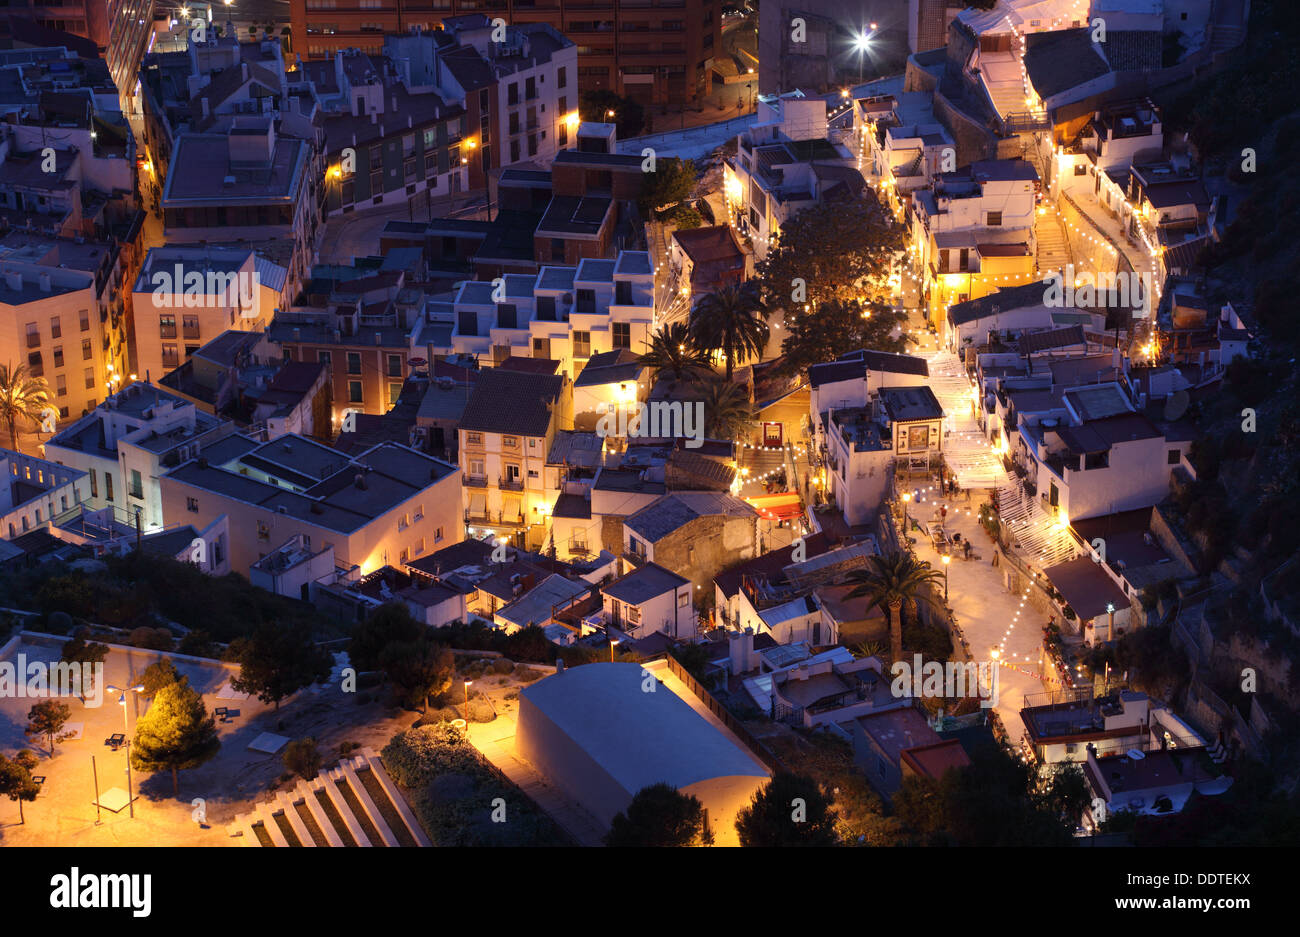 Aerial view of a neighborhood in Alicante at night, Spain Stock Photo